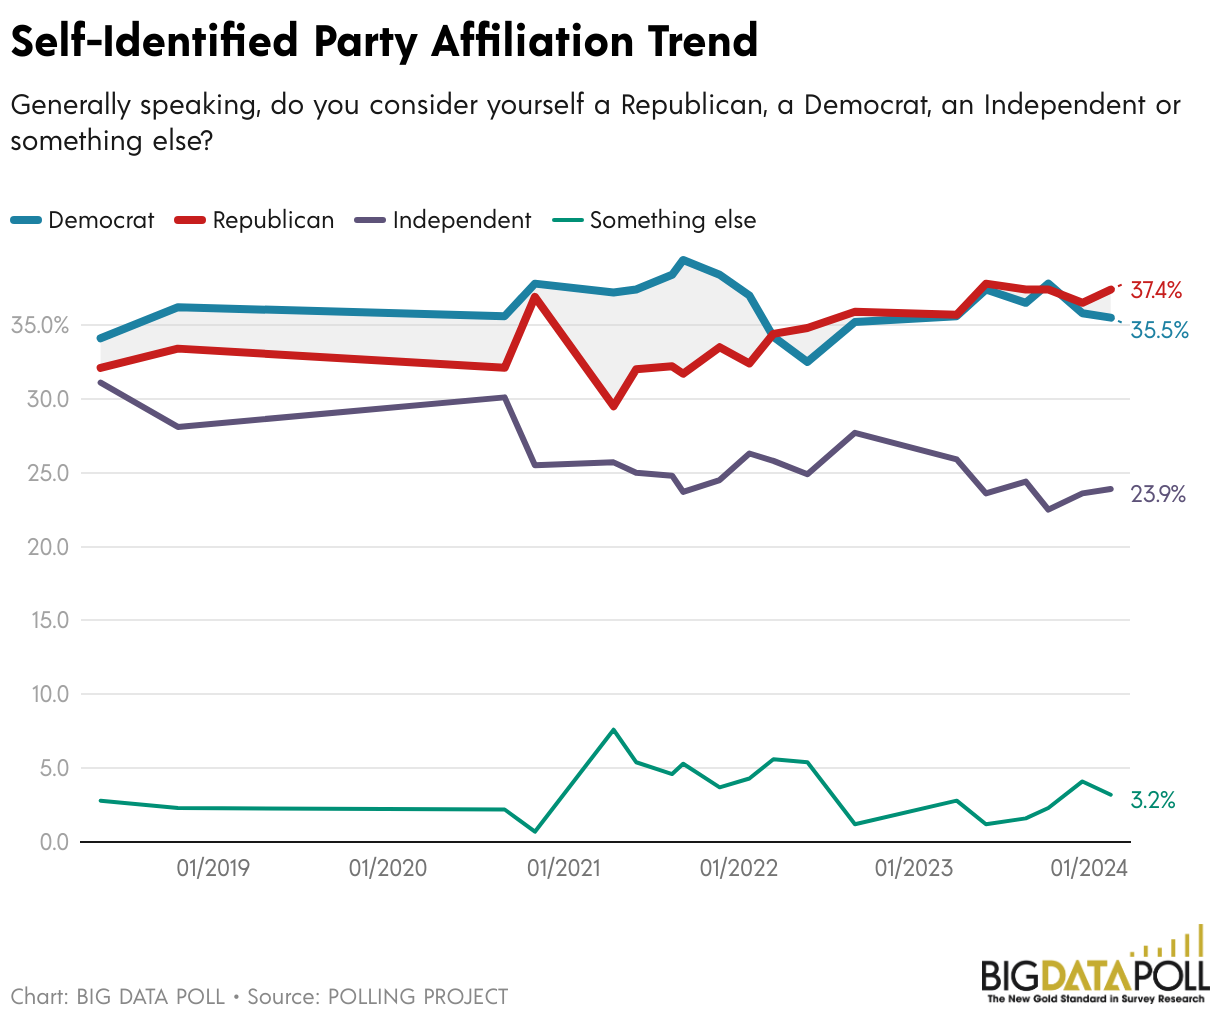 Self-Identified Party Affiliation